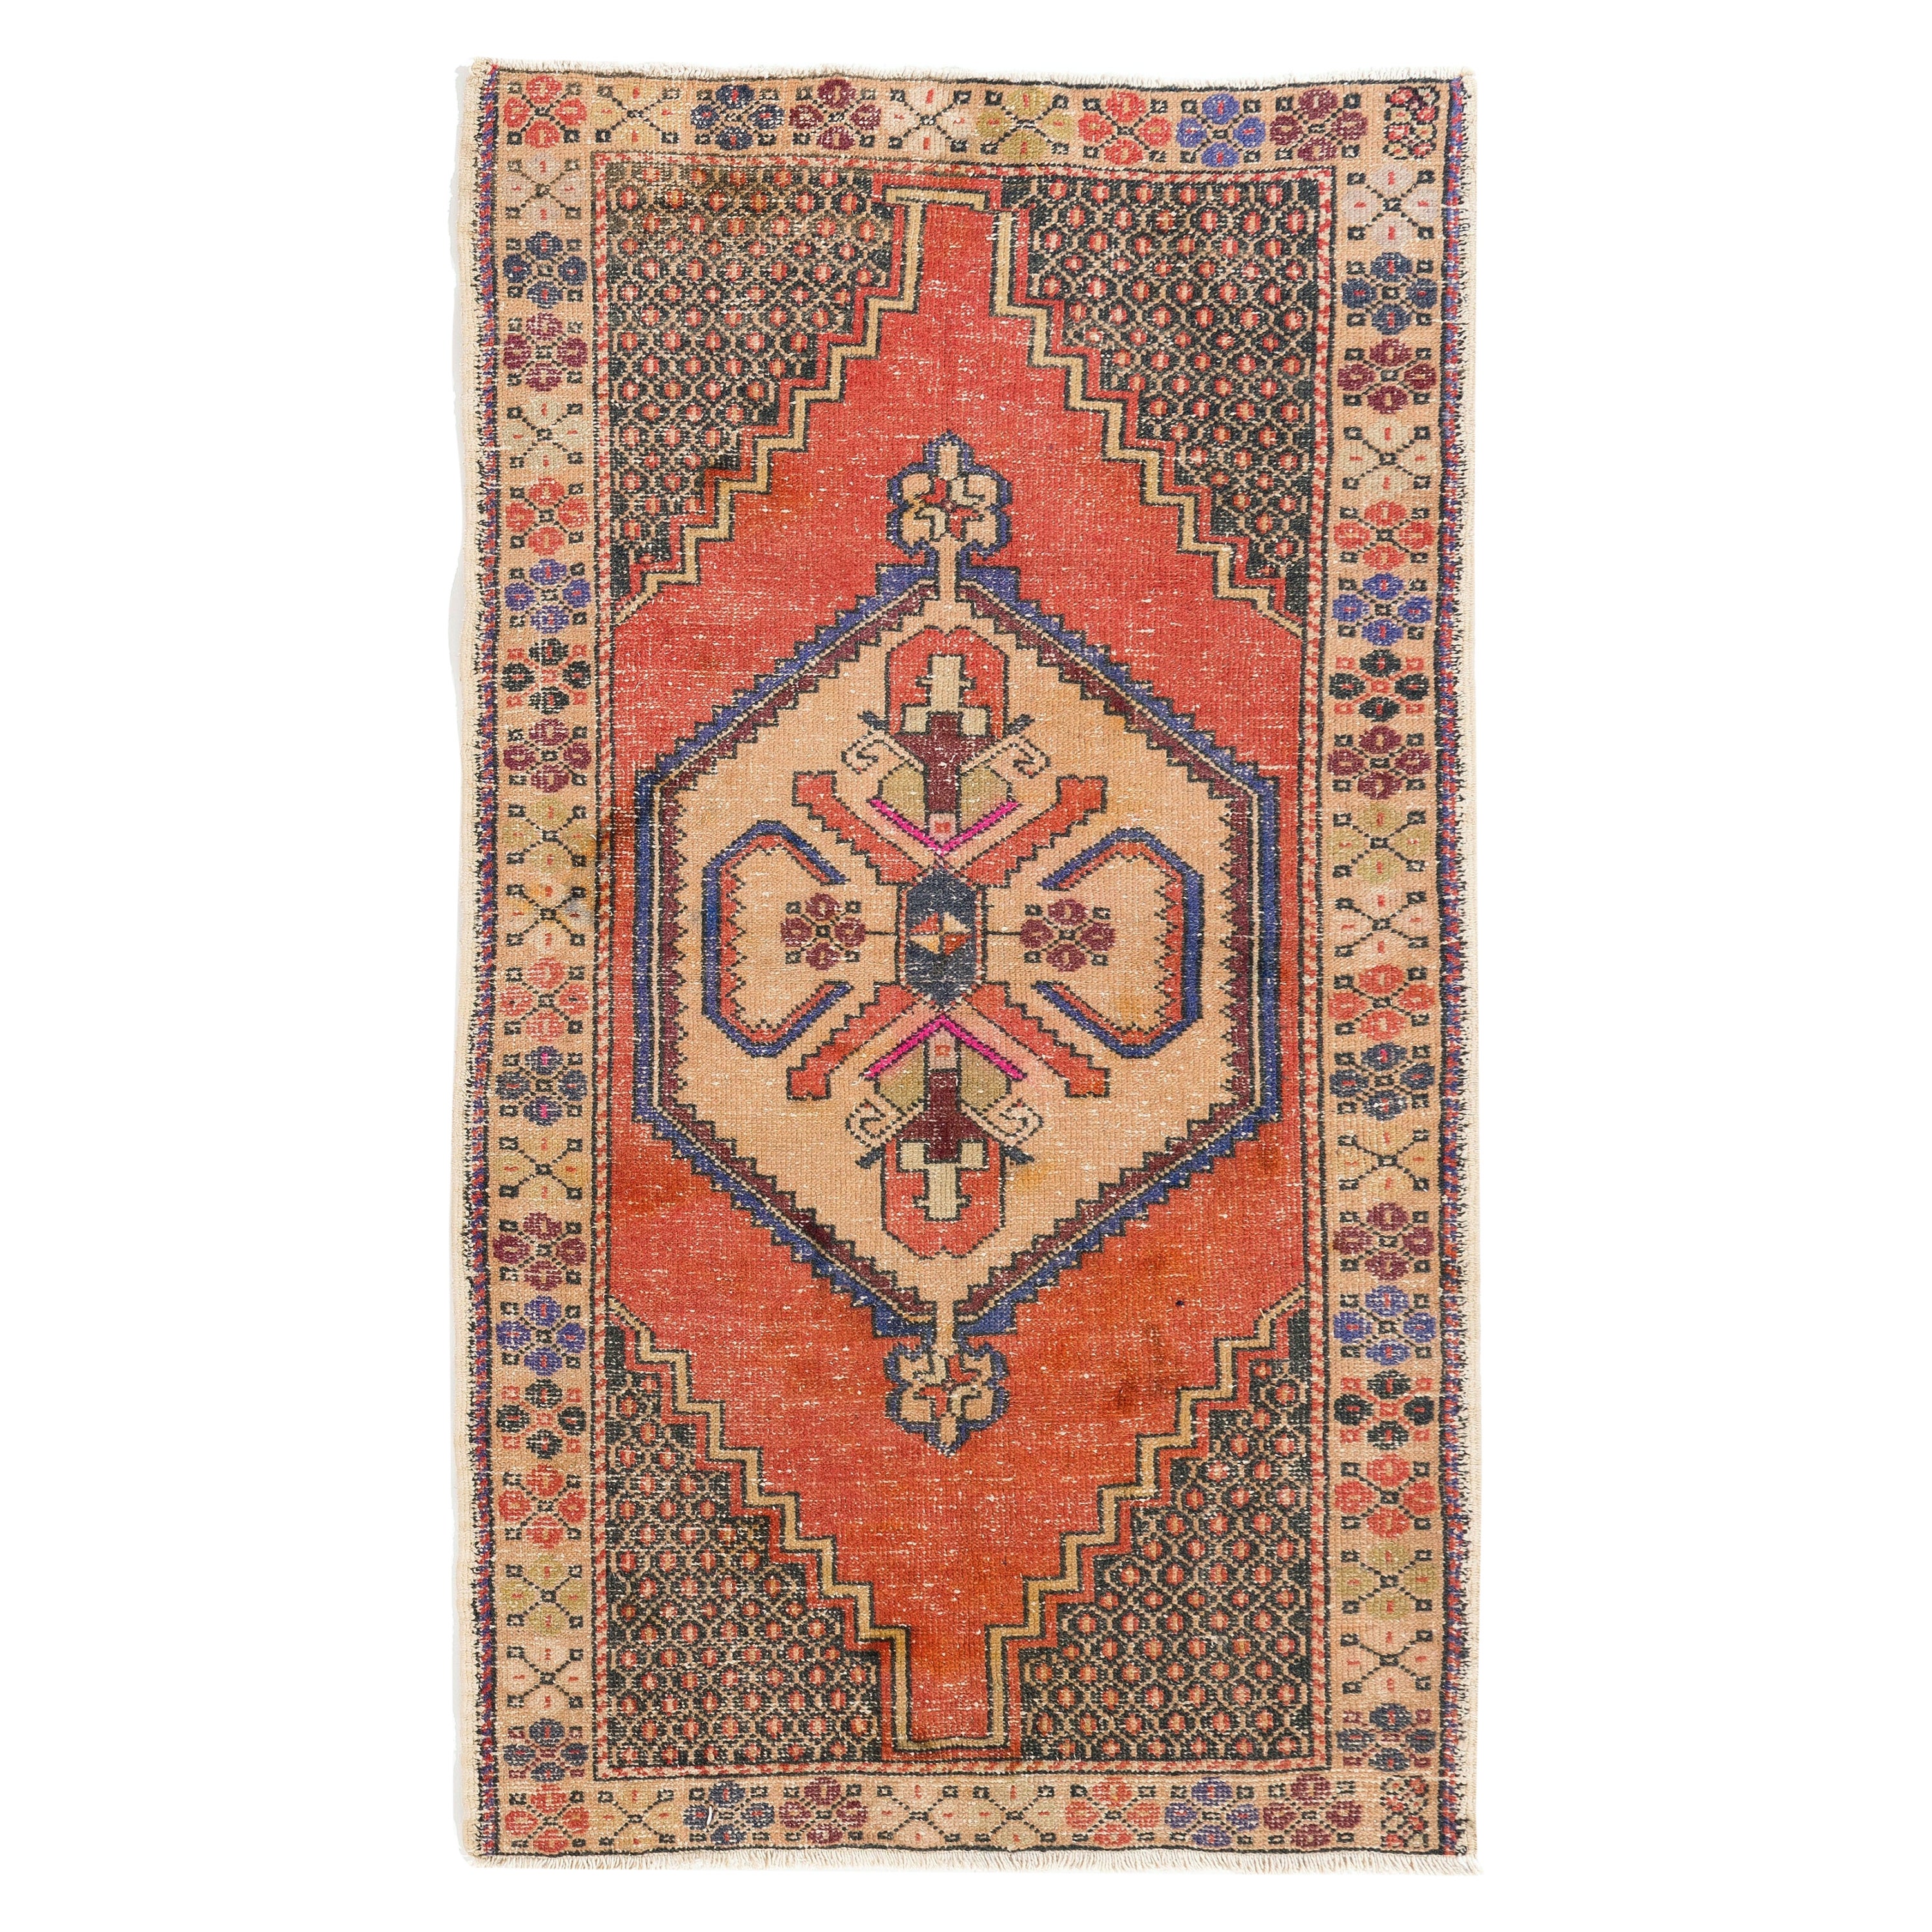 3.7x6.3 Ft Vintage Turkish Accent Rug in Red, Circa 1955, Wool Floor Covering